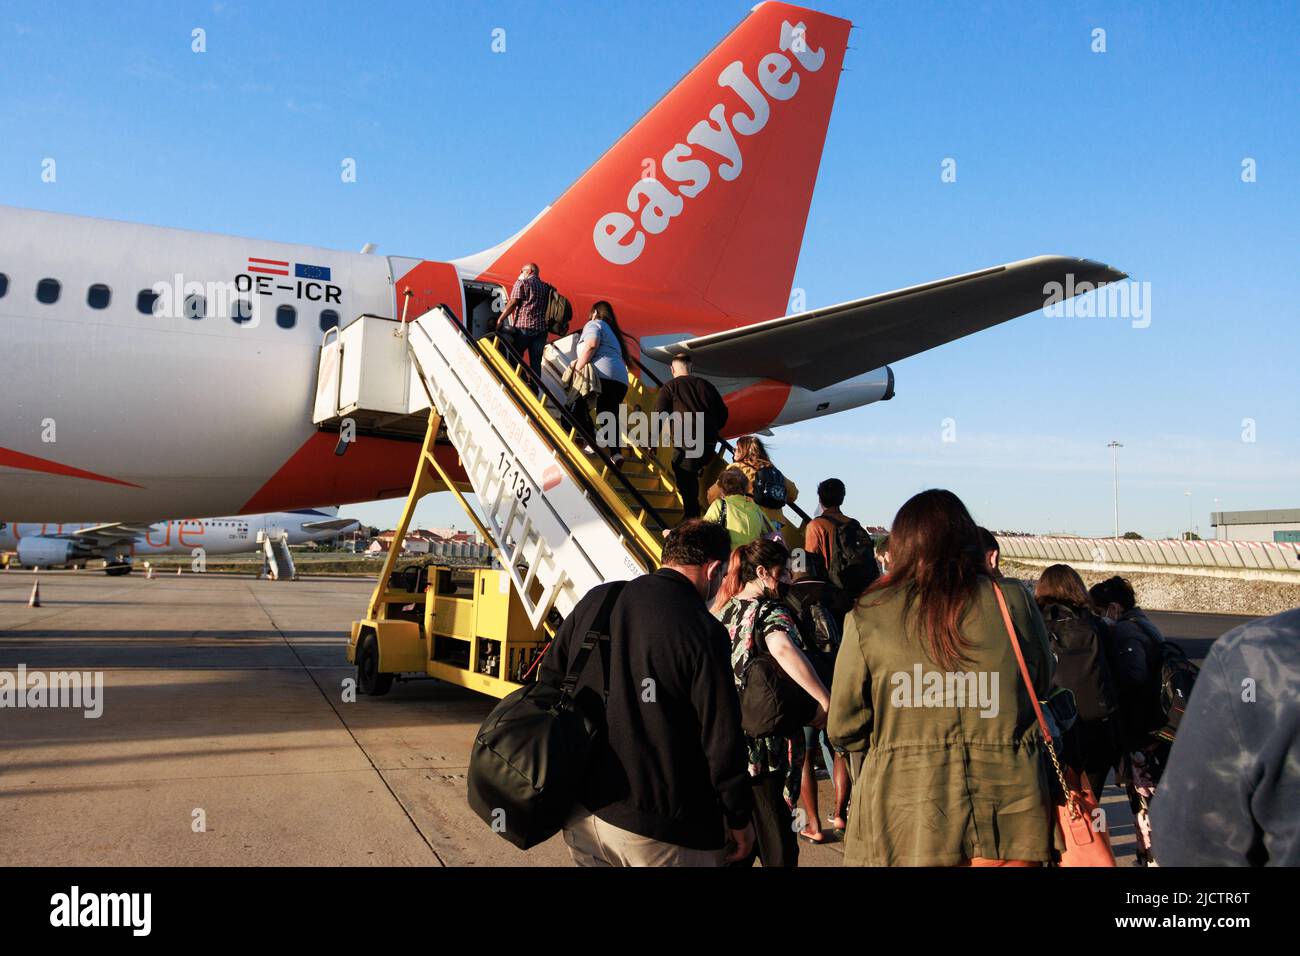 Passengers boarding an Easyjet plane in the early morning at Lisbon airport, Portugal. Stock Photo